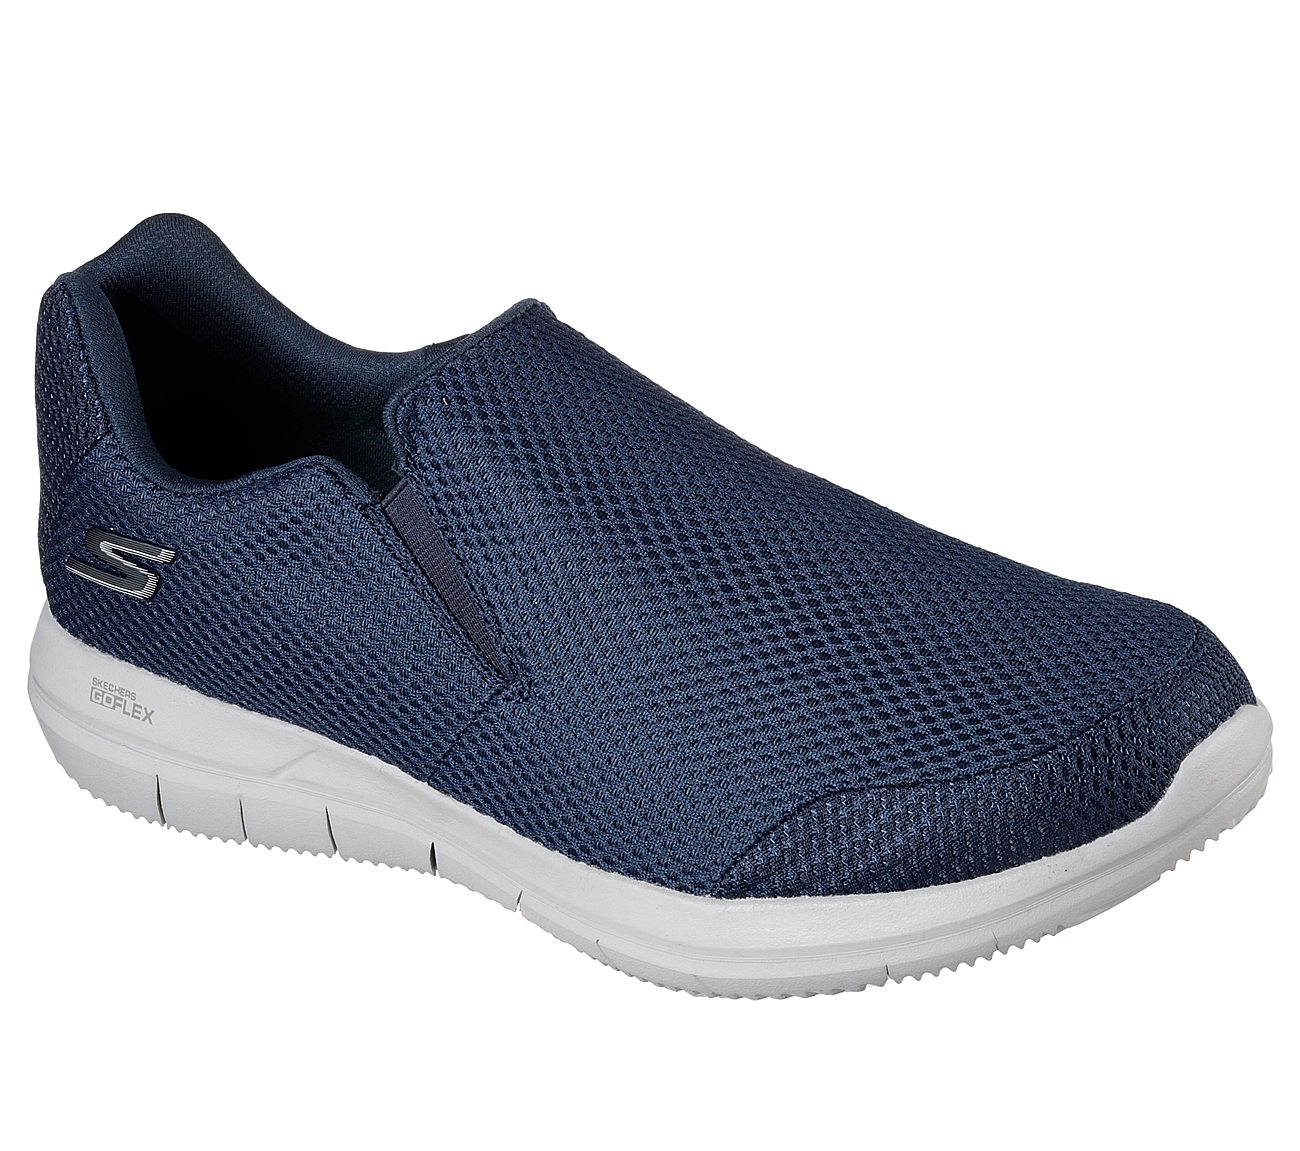 GO FLEX 2 - COMPLETION, NAVY/GREY Footwear Lateral View